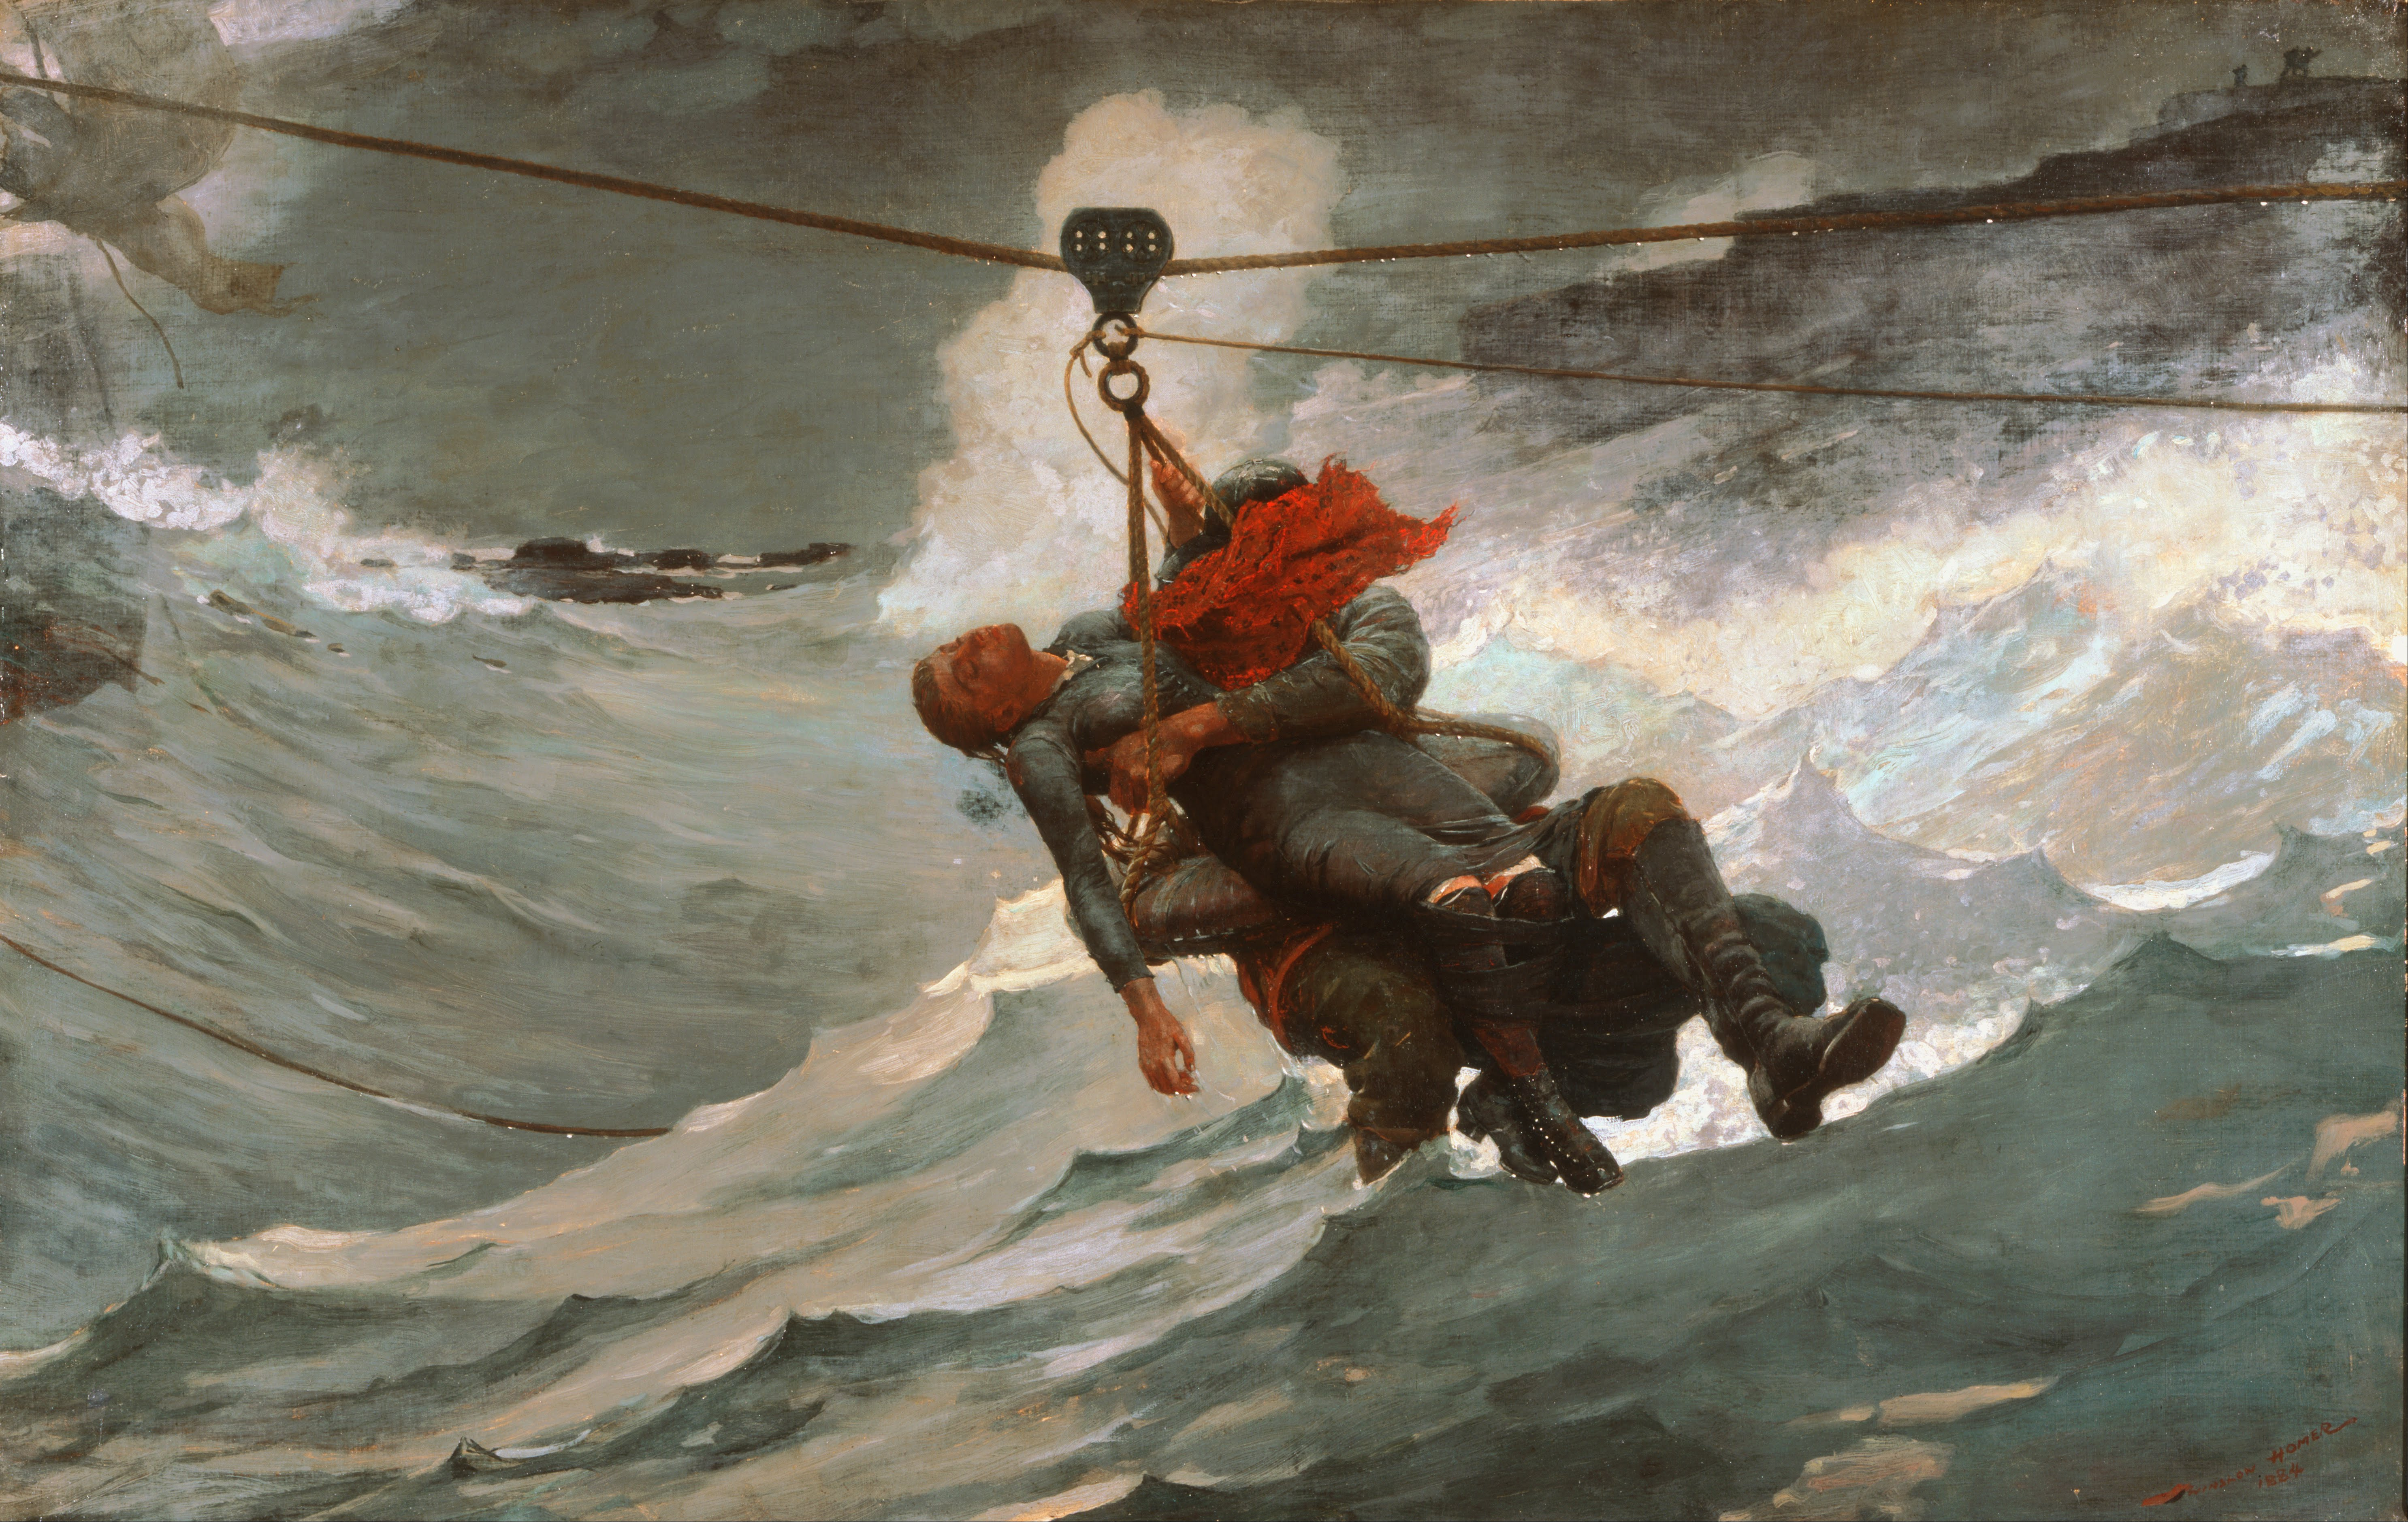 The Life Line by Winslow Homer - 1884 - 44.76 x 28.62 in Philadelphia Museum of Art